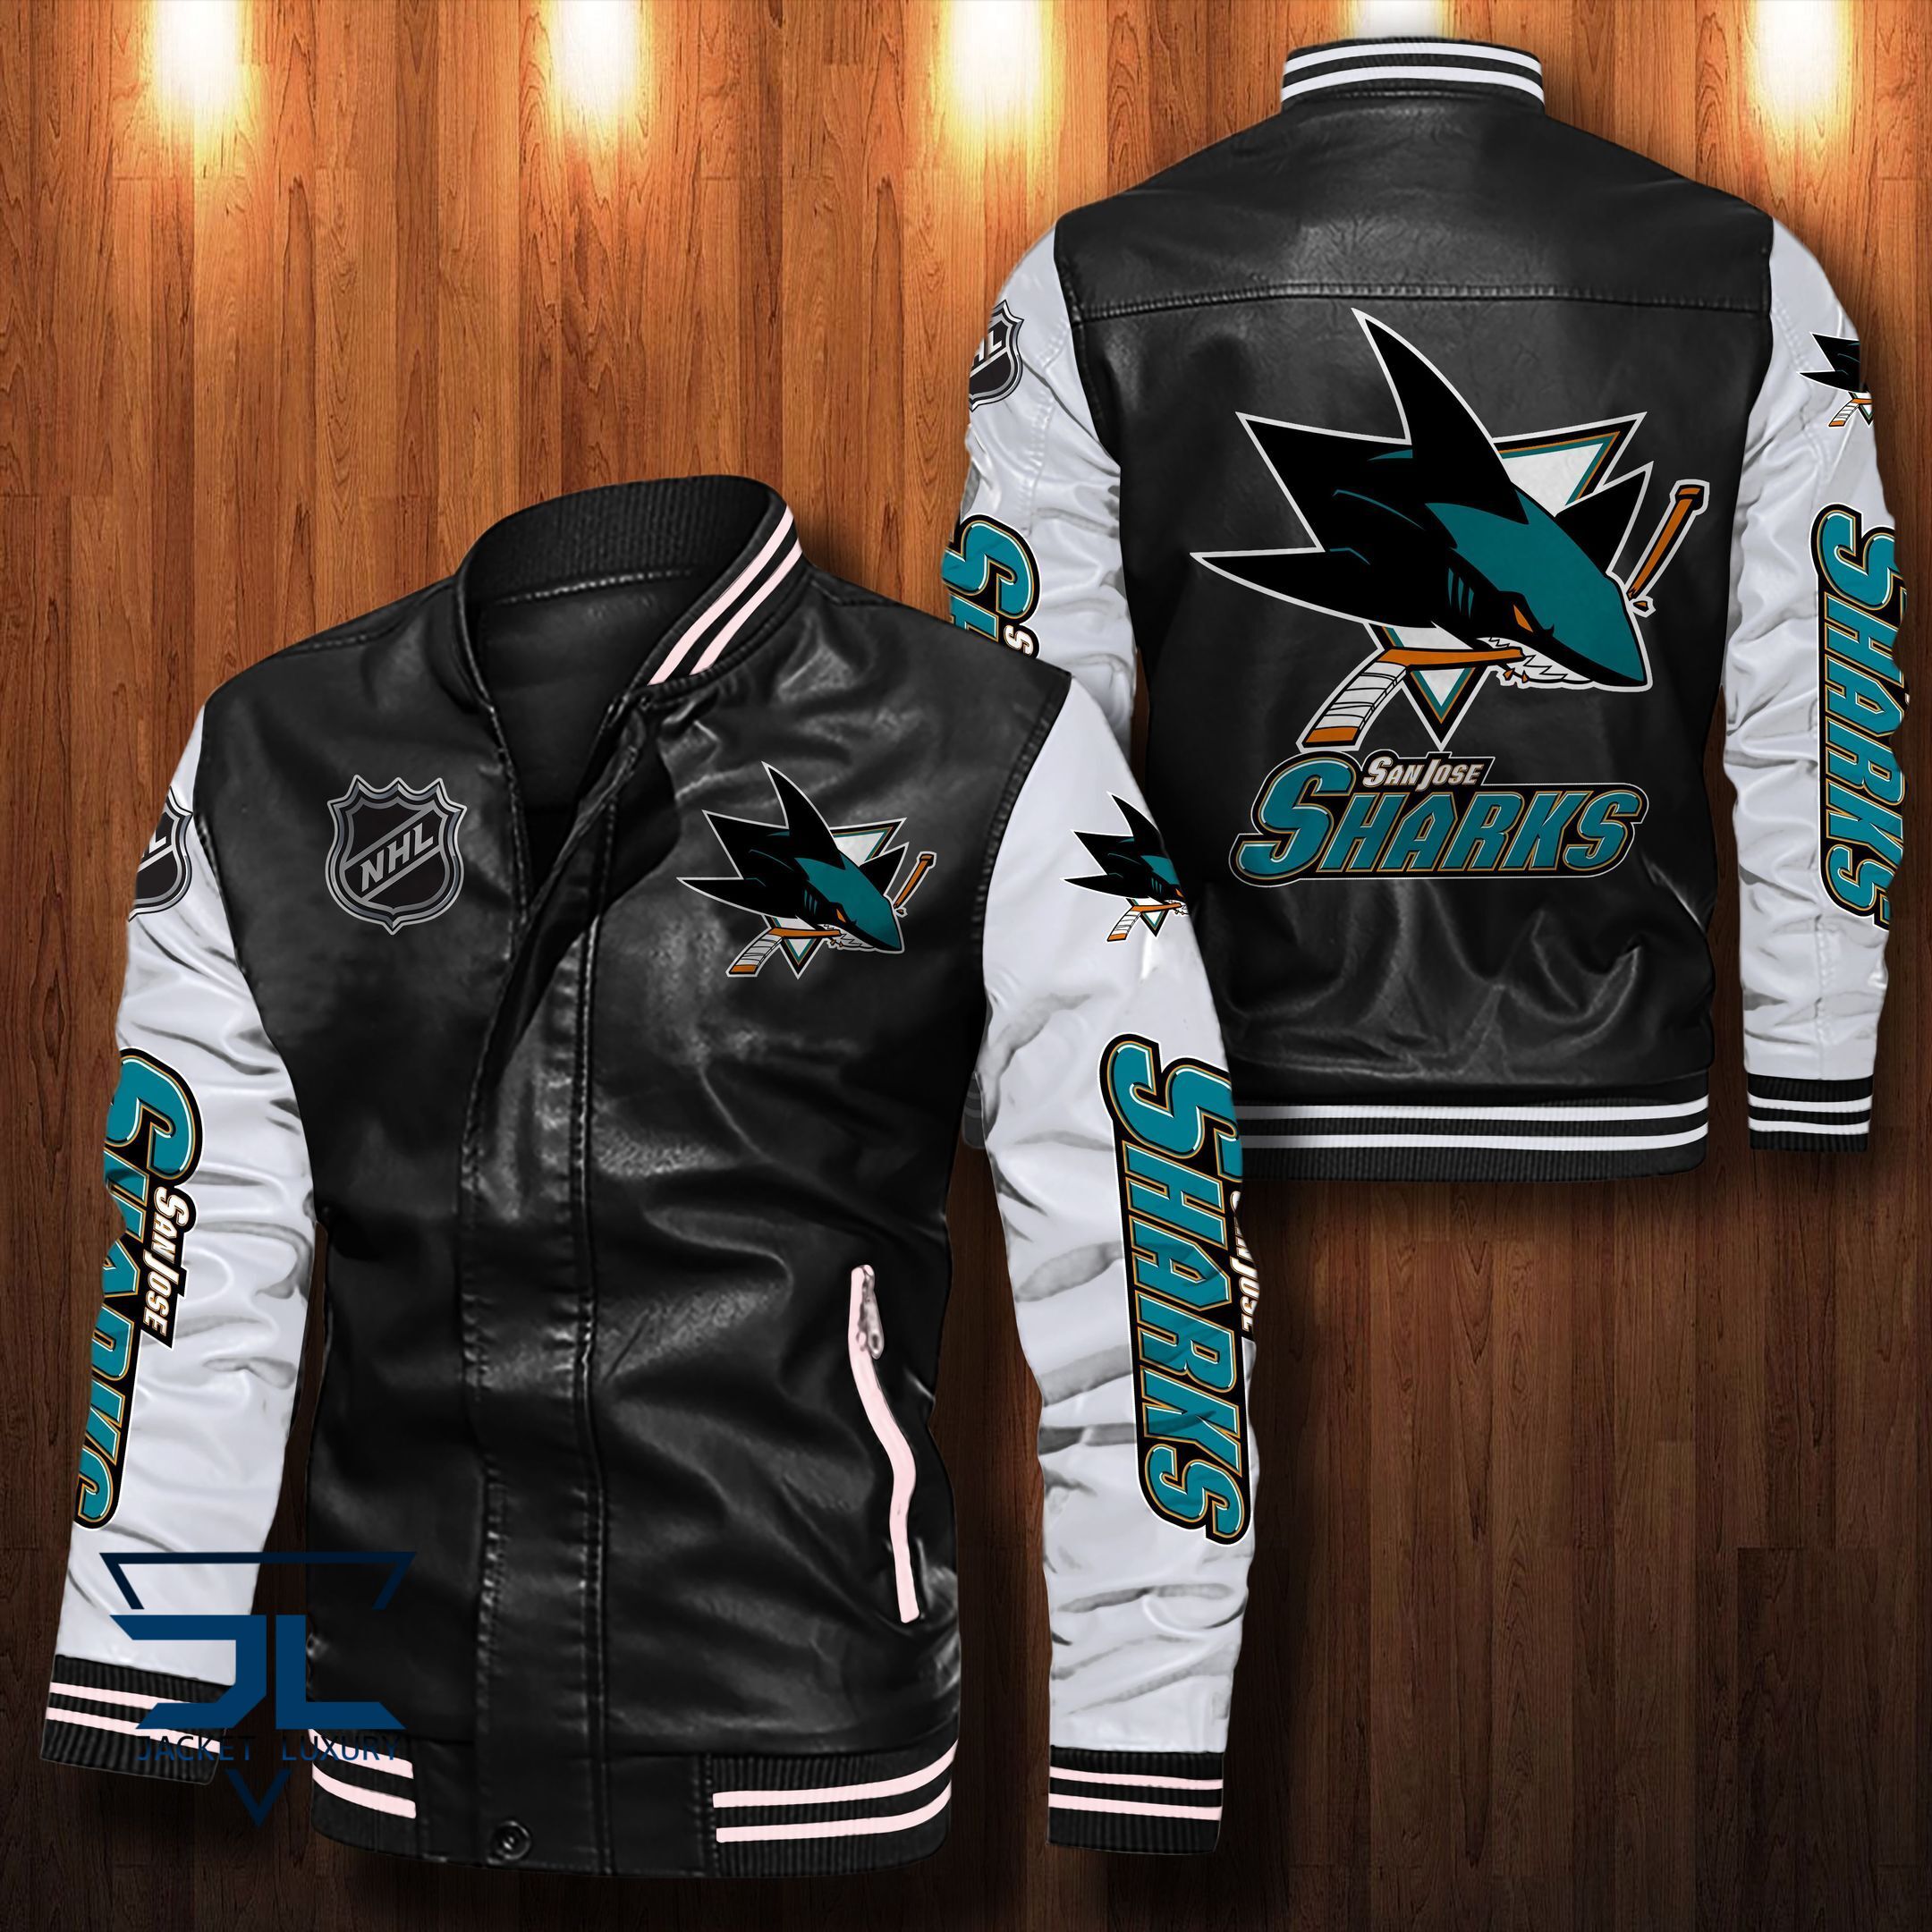 Treat yourself to a new jacket today! 84